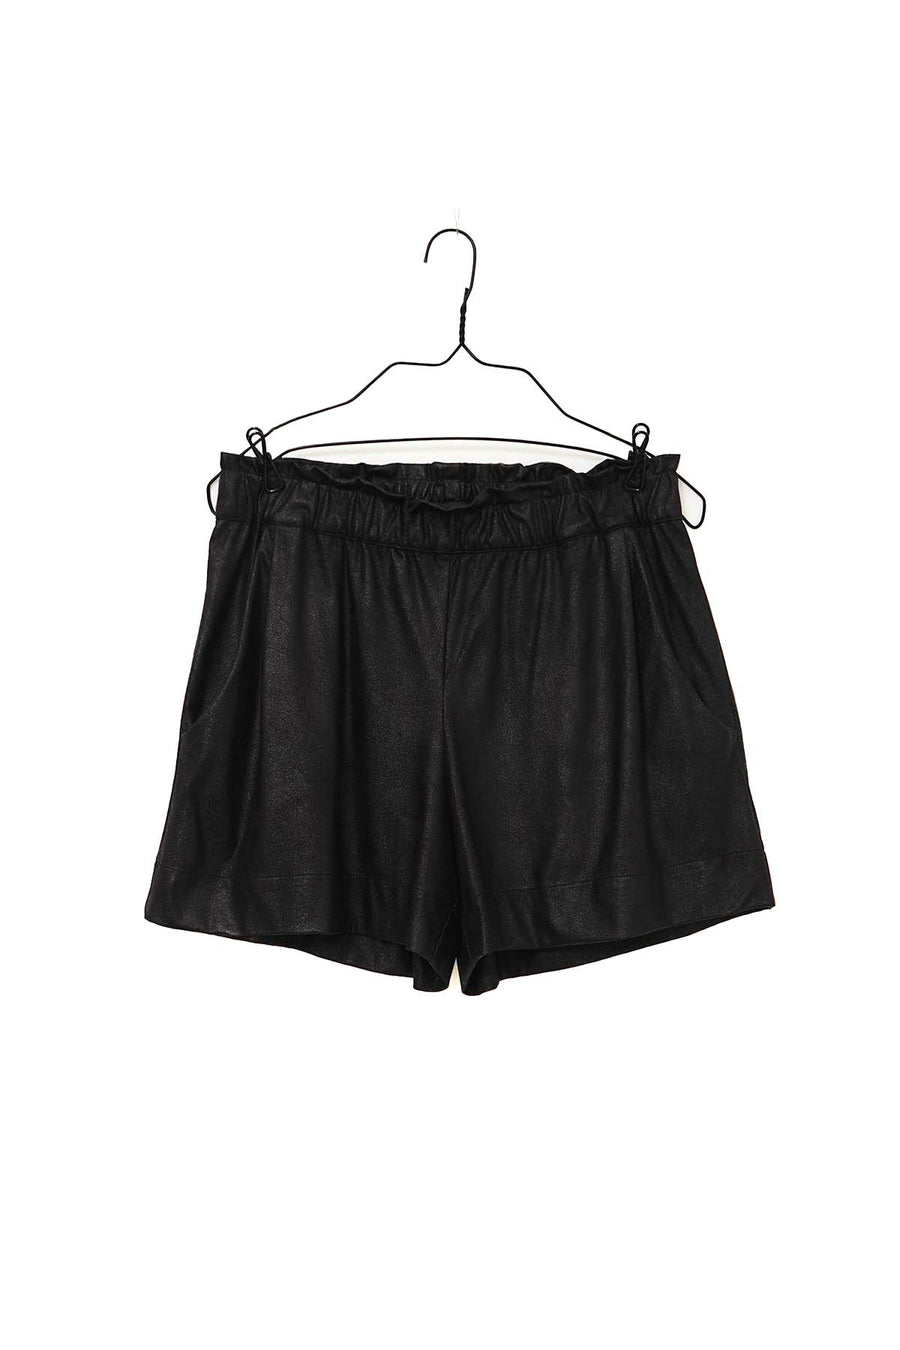 Dolly Faux Leather Short